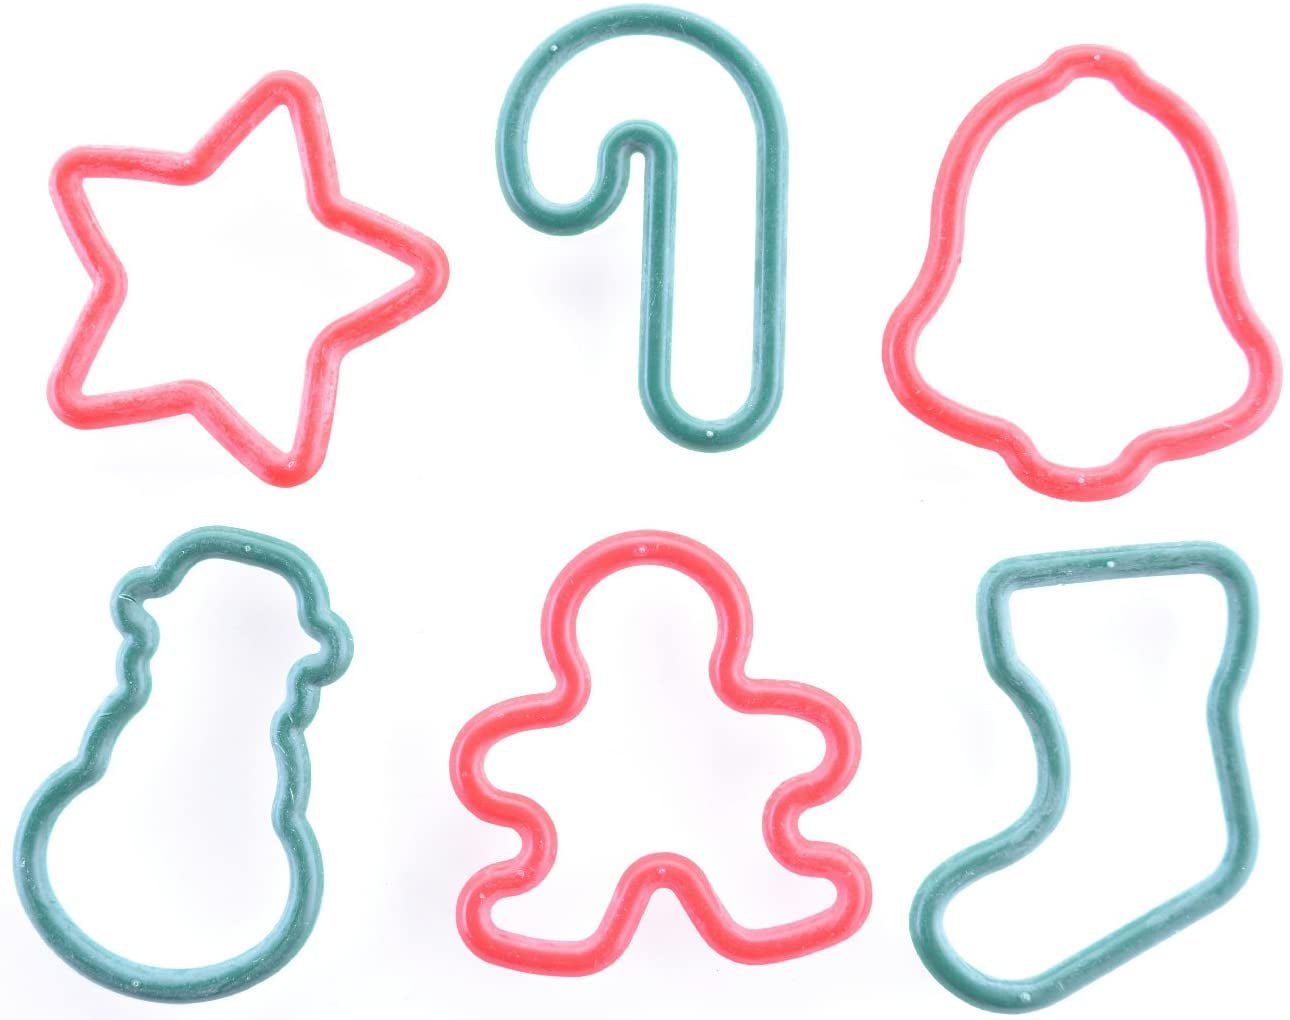 Tree Bell Snowman Star Ginger Cane Details about   World Market Mini Cookie Cutters Xmas Set 6 